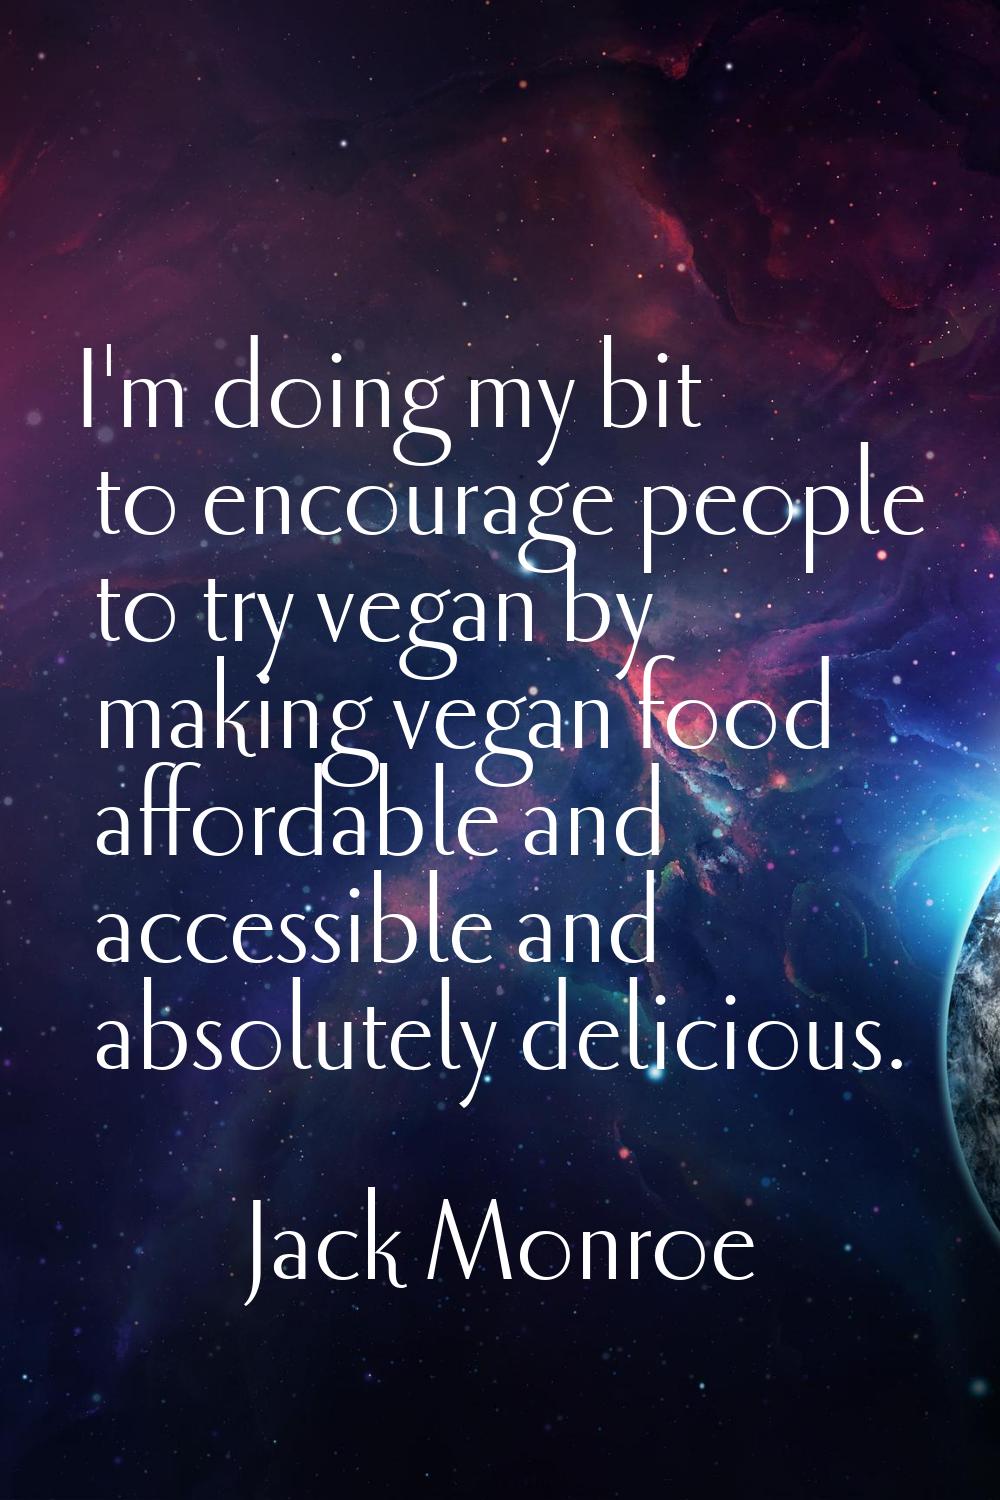 I'm doing my bit to encourage people to try vegan by making vegan food affordable and accessible an